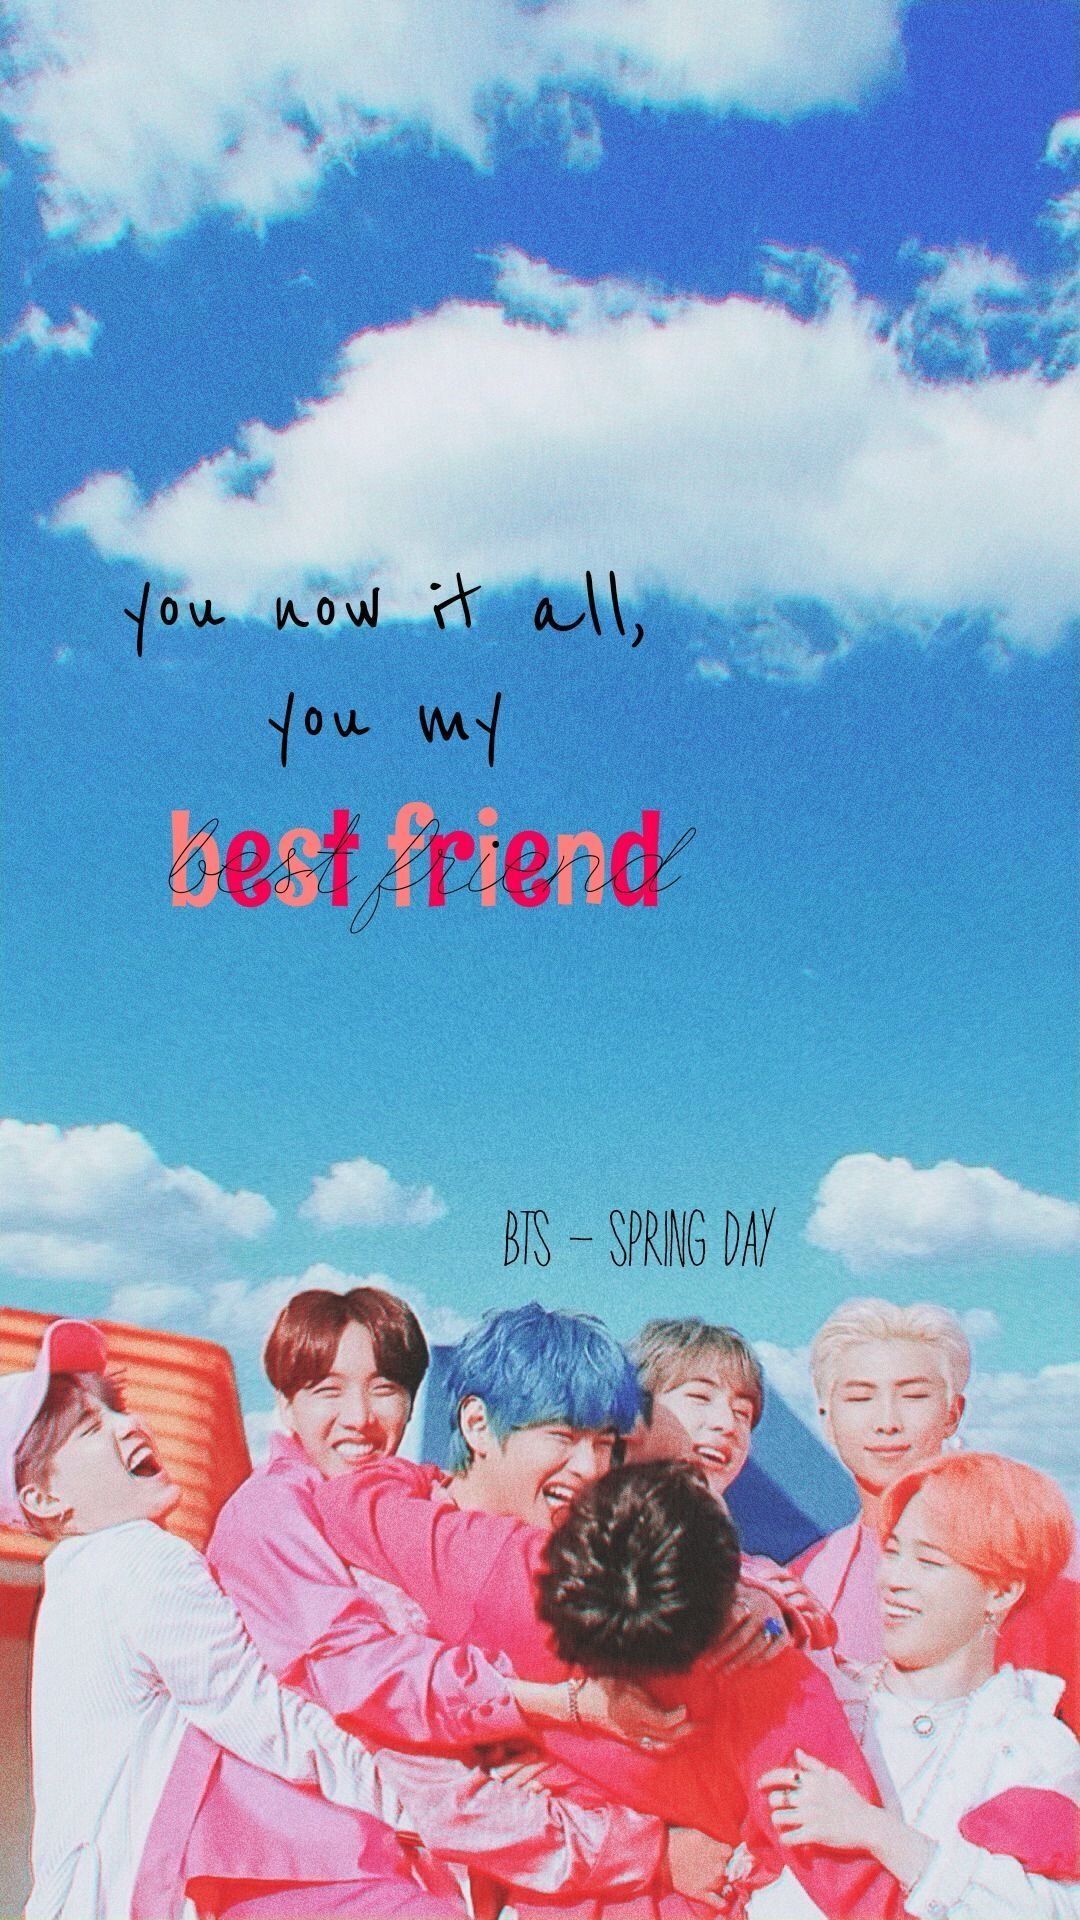 BTS Spring Day wallpaper I made for my phone! - BTS